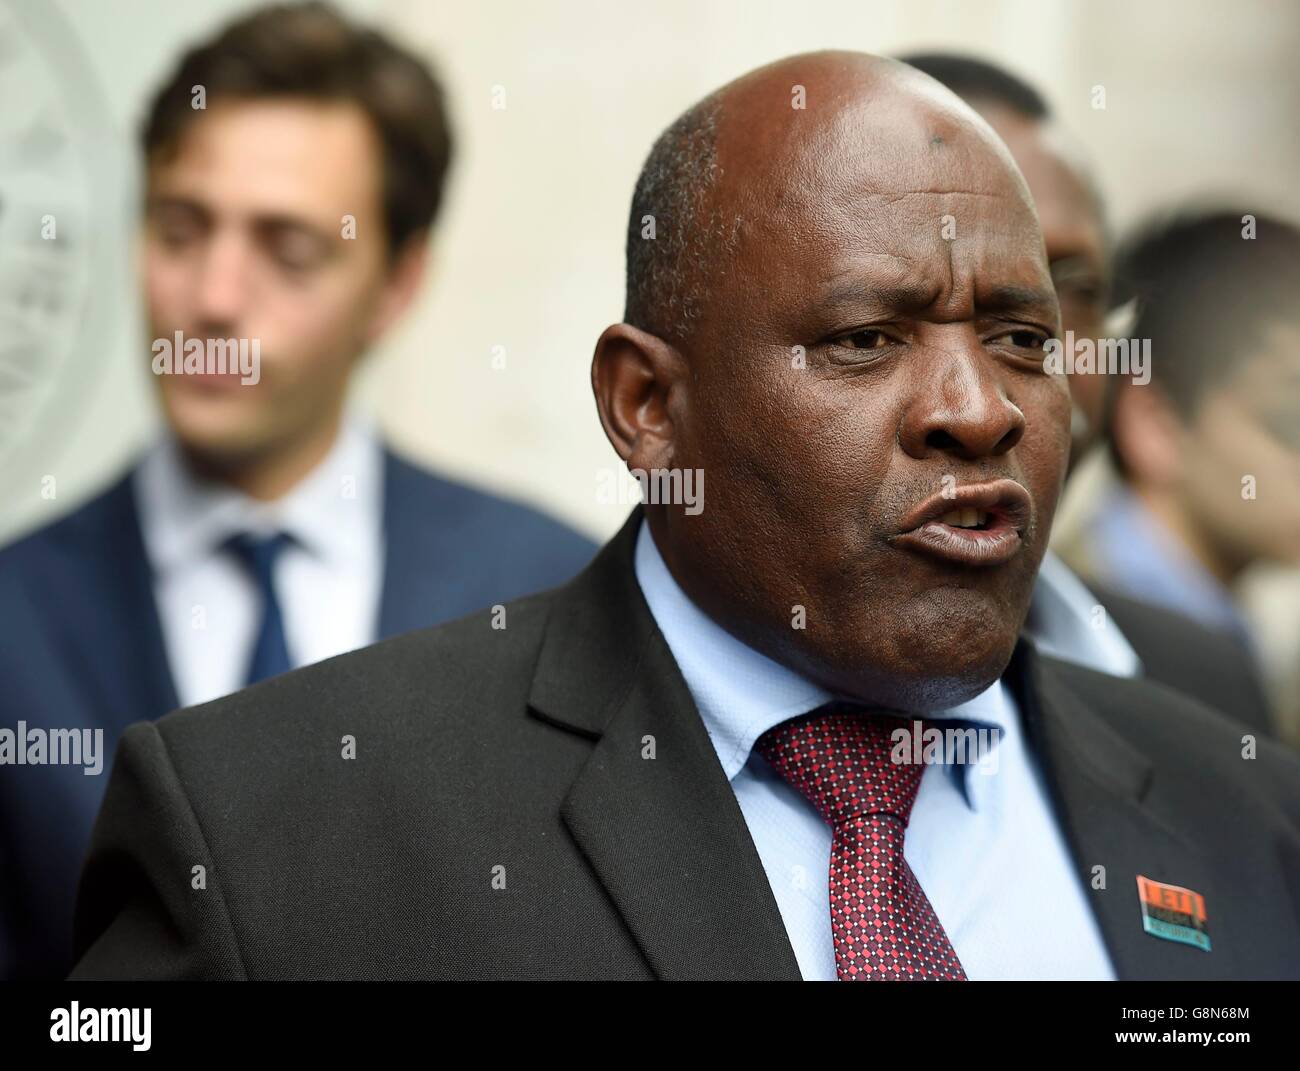 Chagossian leader Olivier Bancoult, who has been fighting in the courts on behalf of former residents of the Chagos Islands who were forcibly removed from their homeland more than 40 years ago, speaks outside the Supreme Court in London after the islanders lost their latest legal challenge. Stock Photo